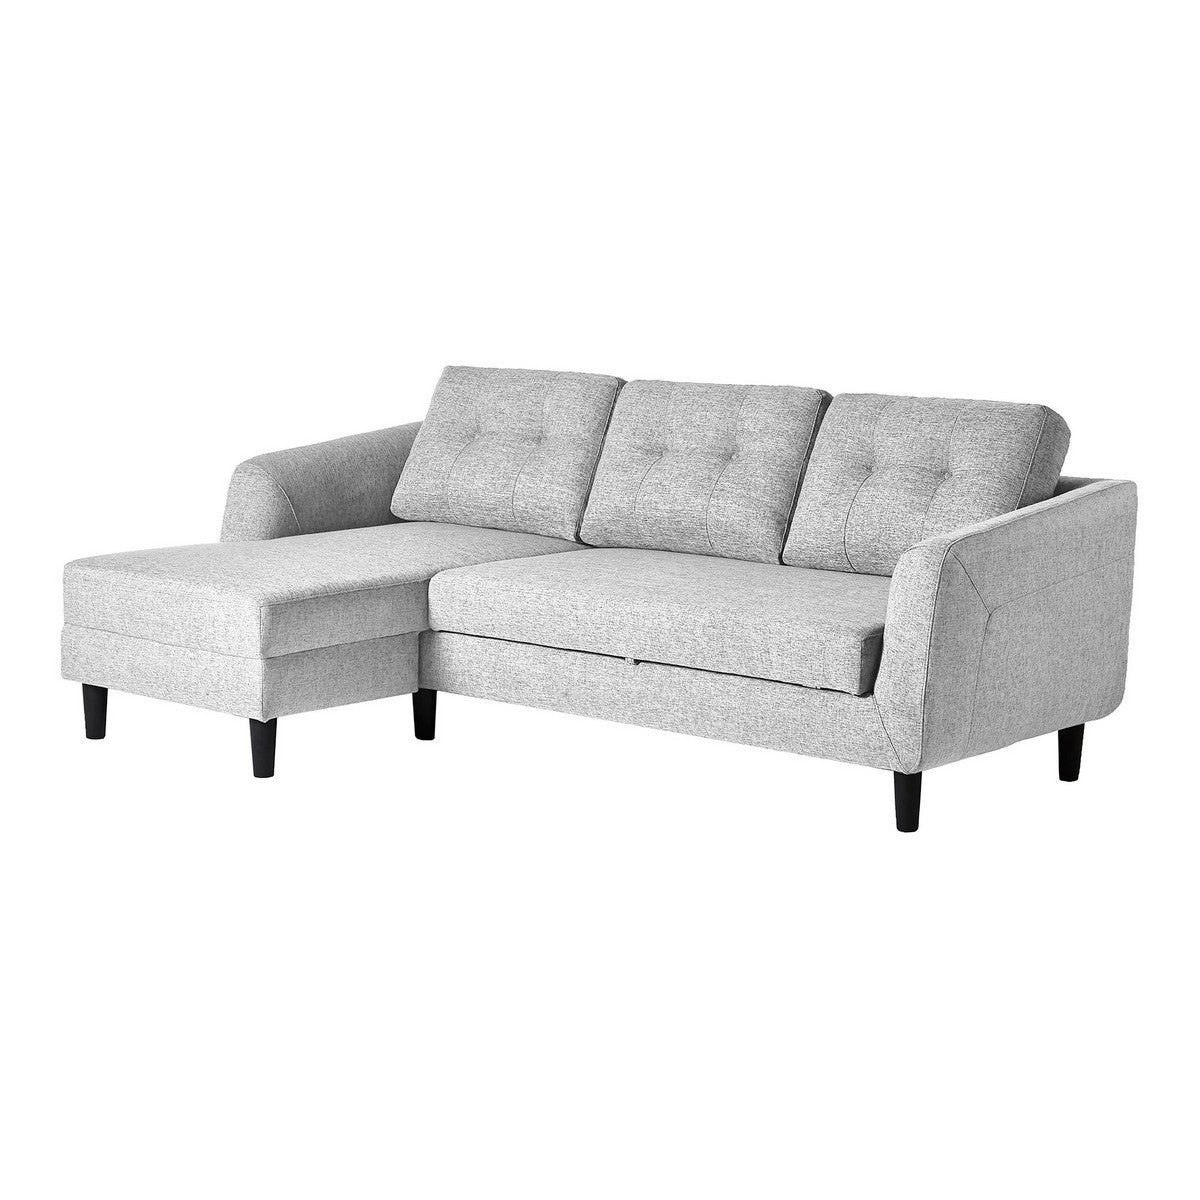 Moe's Home Collection Belagio Sofa Bed With Chaise Light Grey Left - MT-1019-29-L - Moe's Home Collection - Sofa Beds - Minimal And Modern - 1